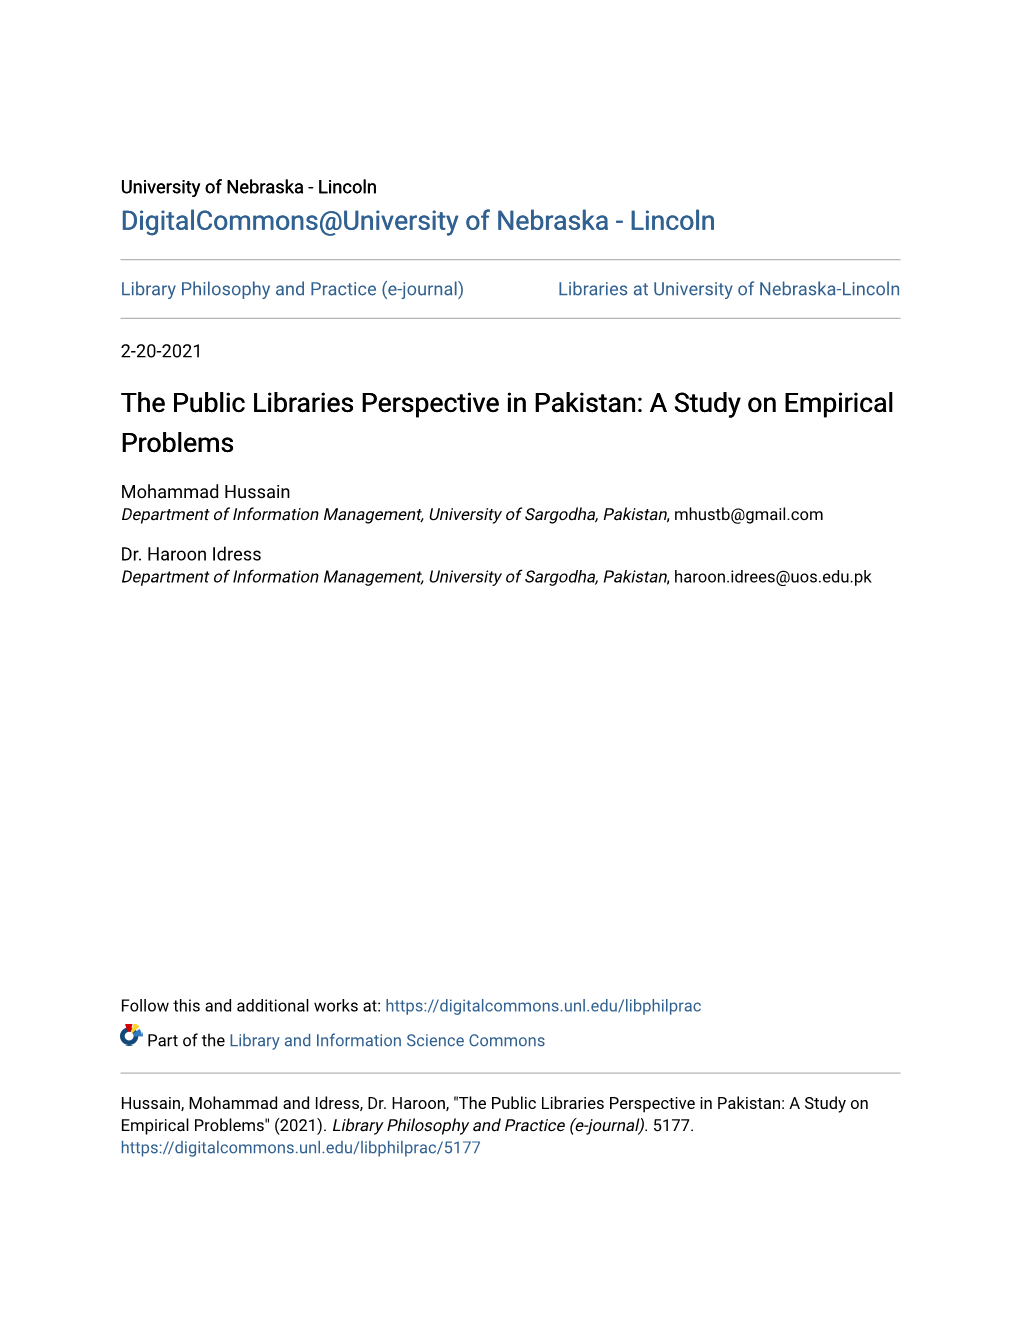 The Public Libraries Perspective in Pakistan: a Study on Empirical Problems